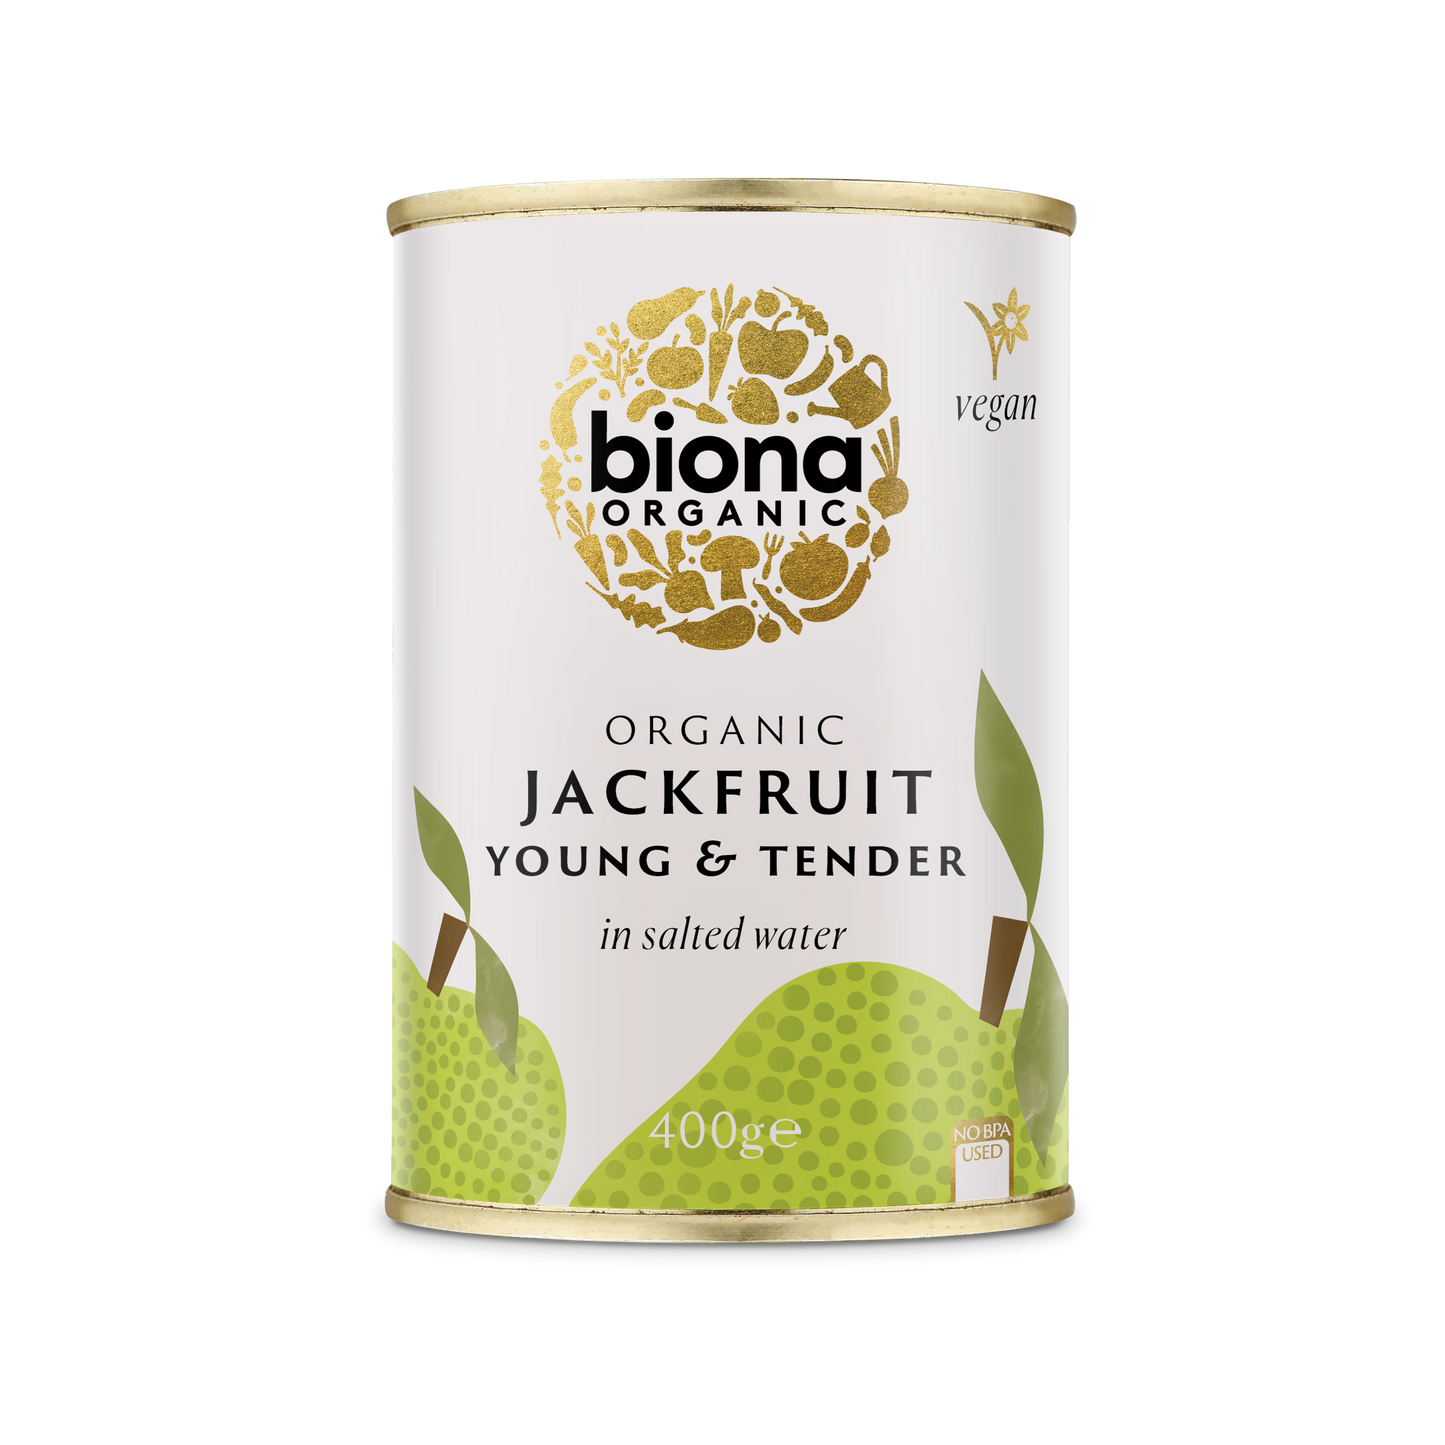 Biona Organic Young Jackfruit in Salted Water 400g - Pack of 6